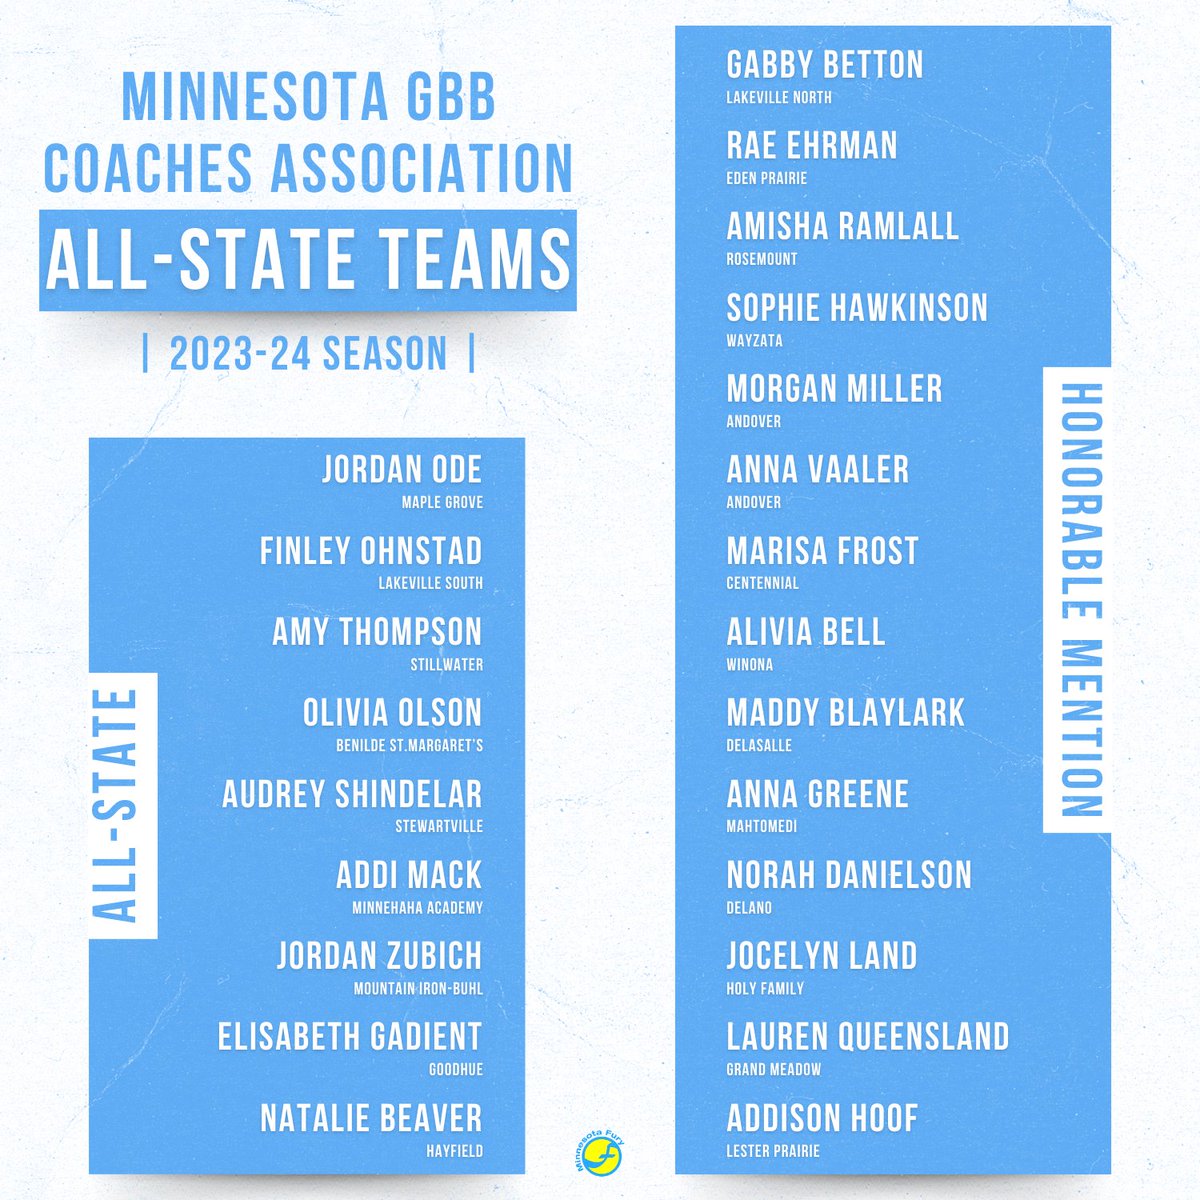 Congratulations to our players who were named to the Minnesota GBB Coaches Association 𝗔𝗟𝗟-𝗦𝗧𝗔𝗧𝗘 𝗧𝗘𝗔𝗠𝗦! 👏 #FuryFam | #ThisIsWhyYouFury